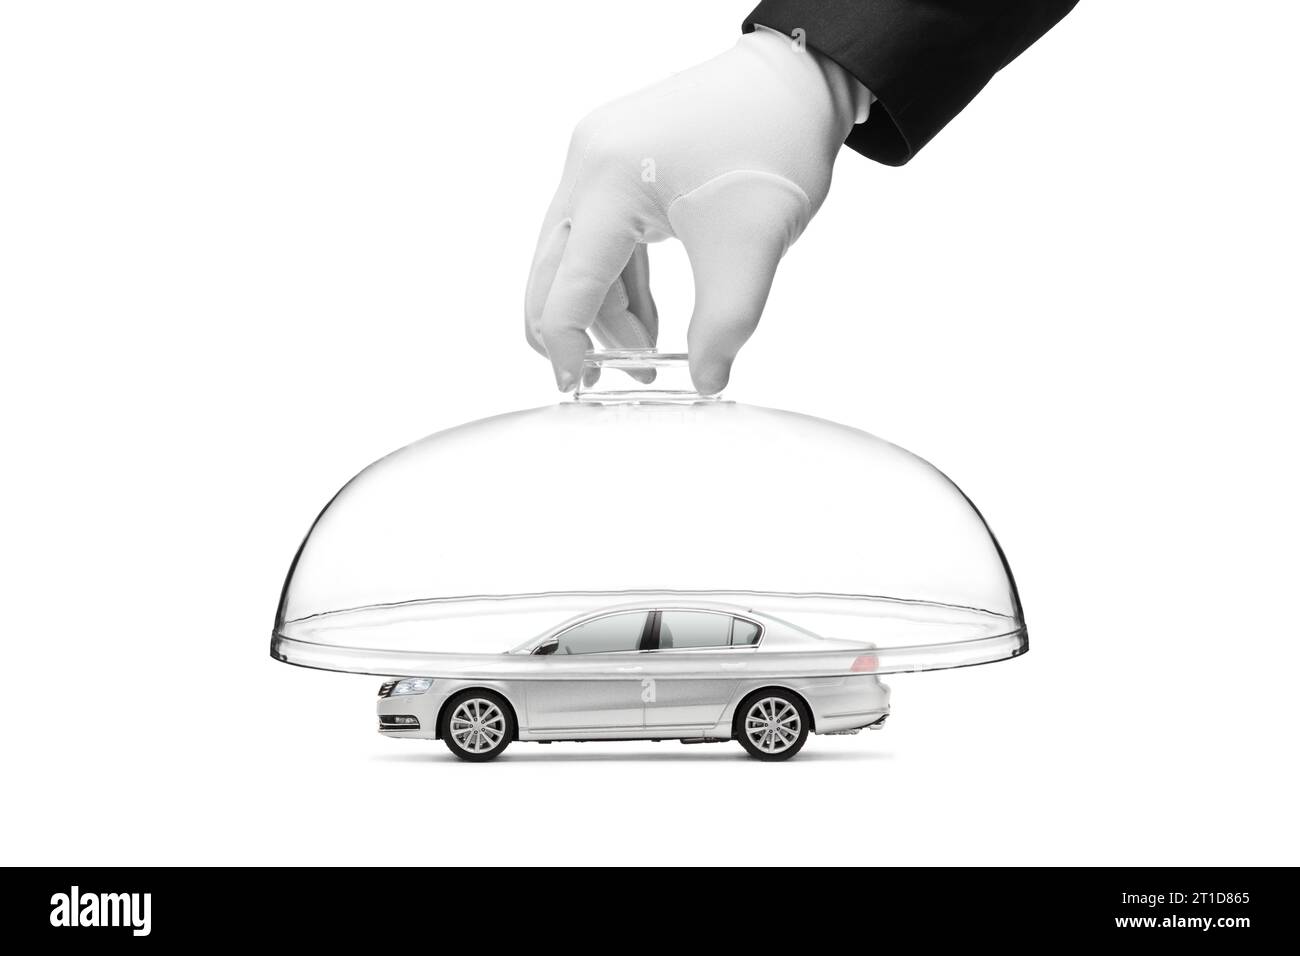 A gloved hand putting a glass dome over a car symbolizing car security and car insurance concept isolated on white background Stock Photo